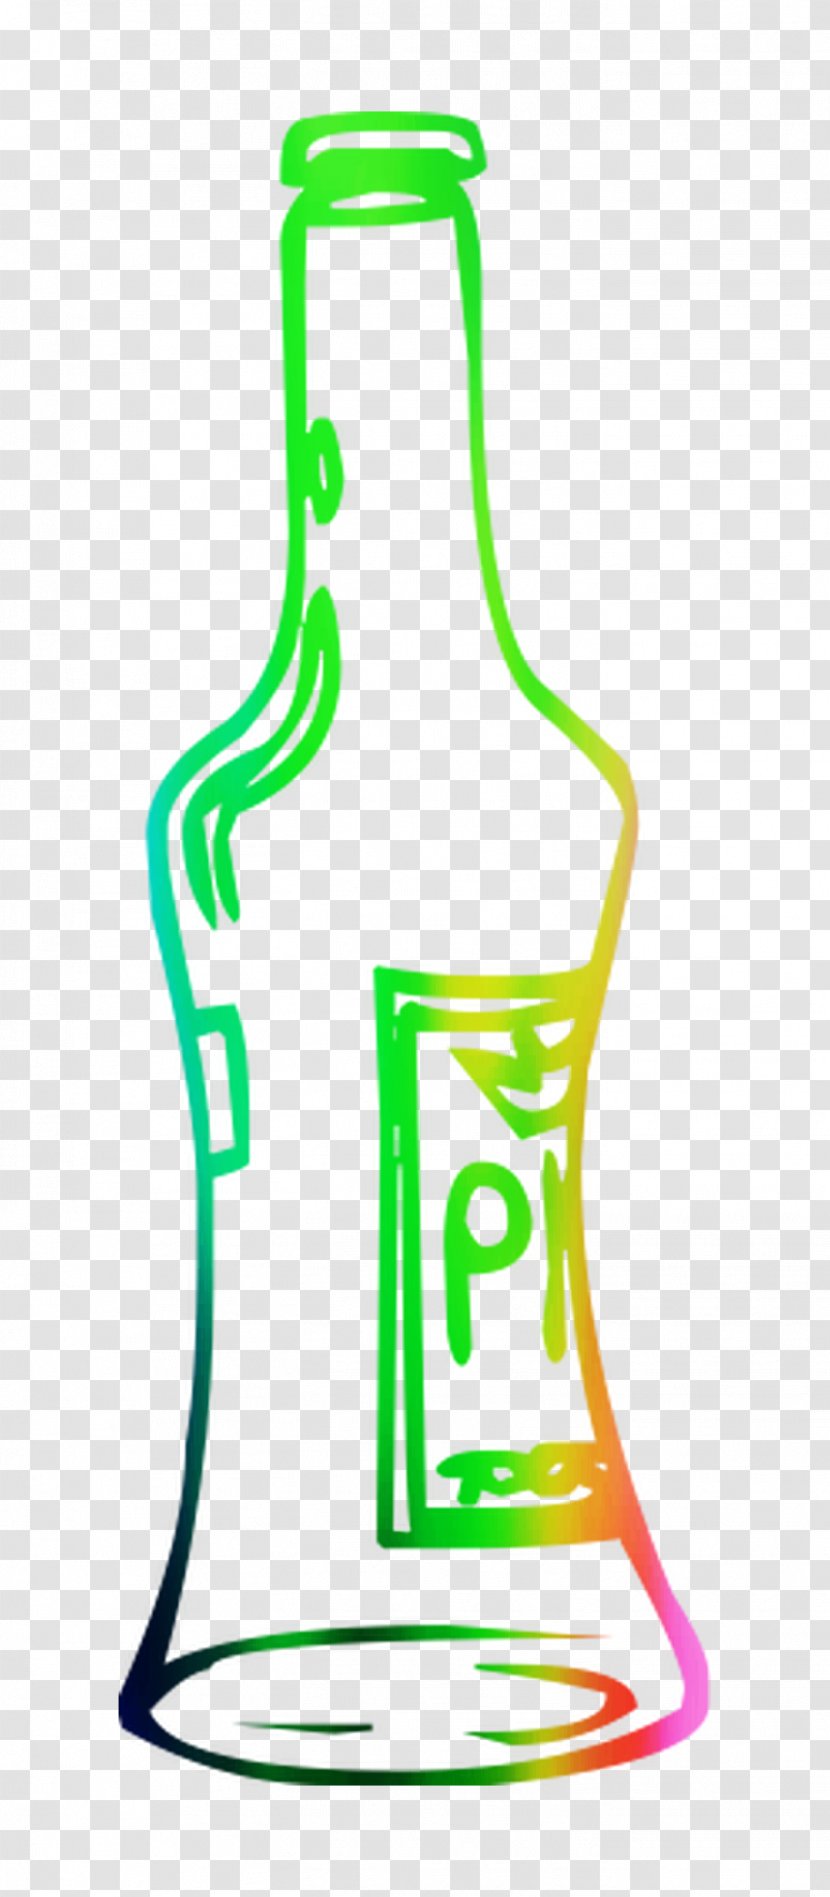 Clothing Green Product Design Clip Art - Drinkware Transparent PNG